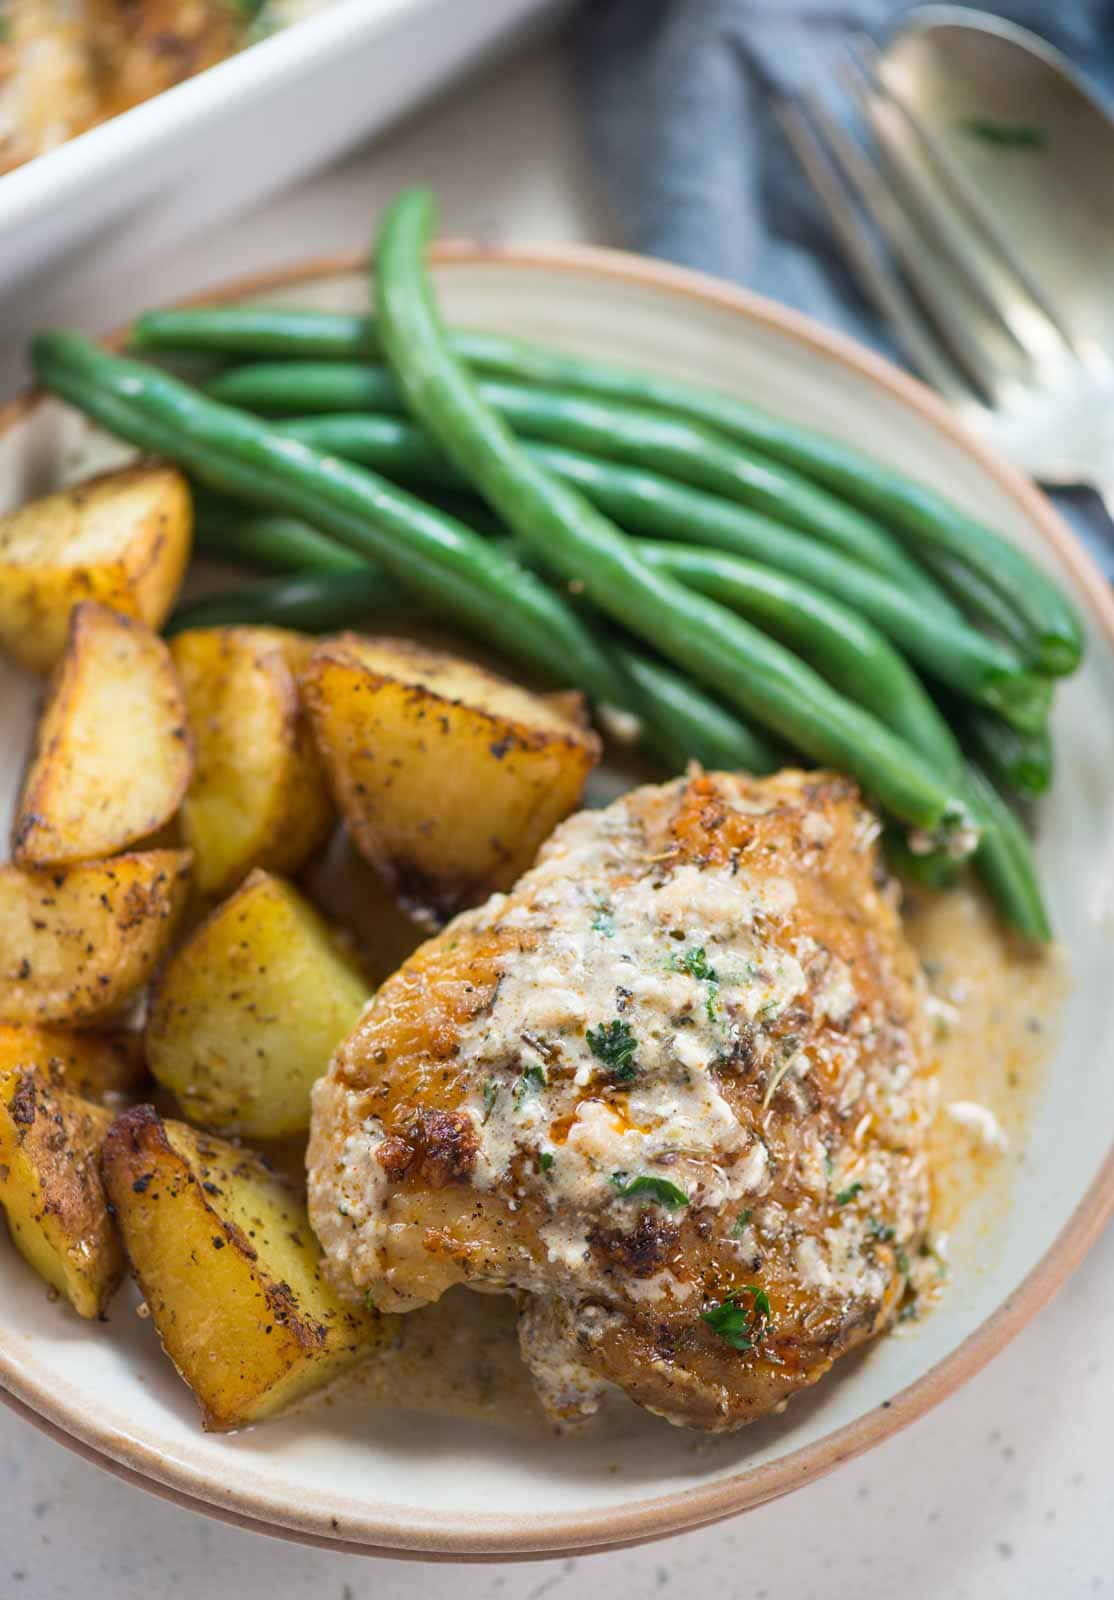 Crispy Baked Chicken thighs in a creamy parmesan sauce can be made in the oven from start to finish. Perfectly seasoned chicken thighs are juicy with crispy skin is easy enough for a weeknight family dinner.